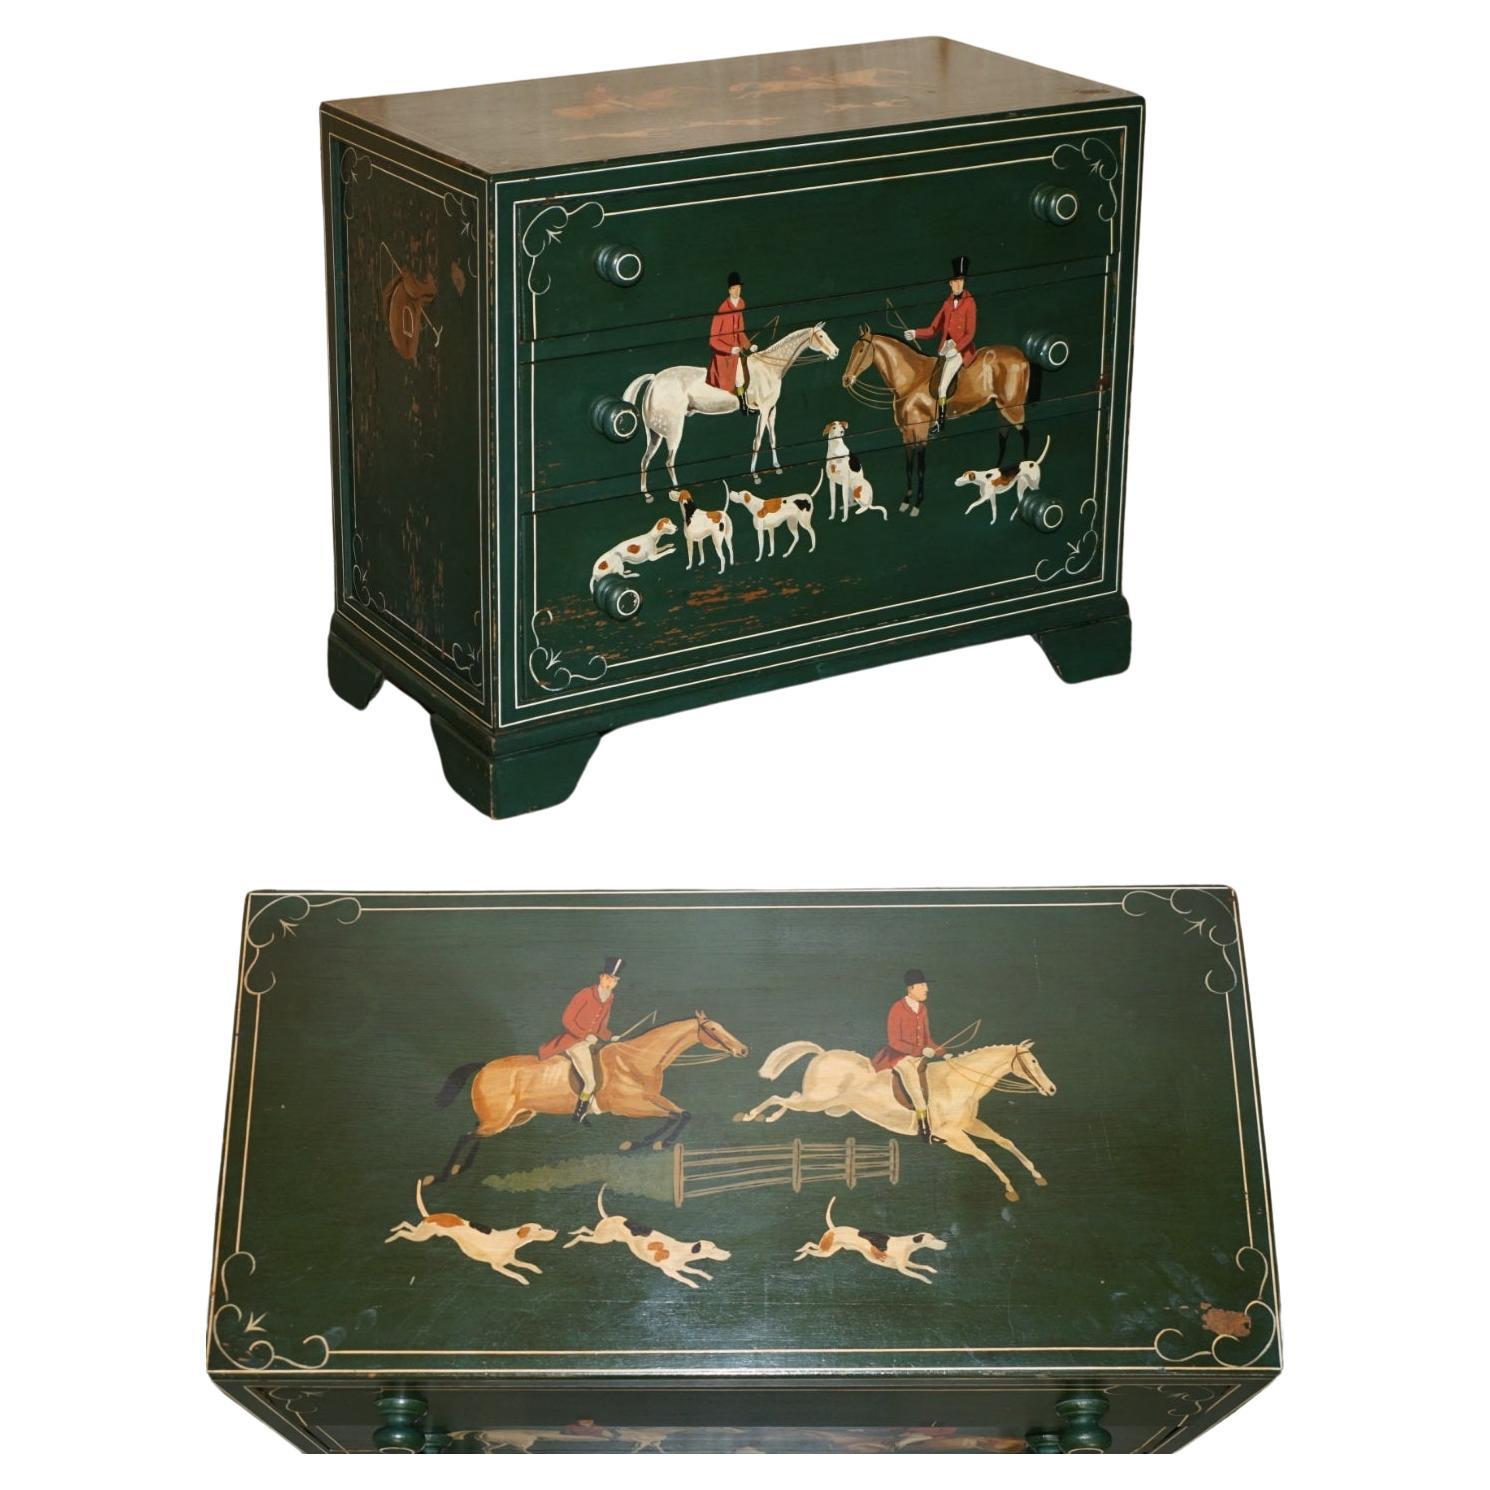 LOVELY ANTiQUE CHEST OF DRAWERS PAINTES EN GREEN DEPICTING HORSE & RIDER CIRCA 1900 en vente